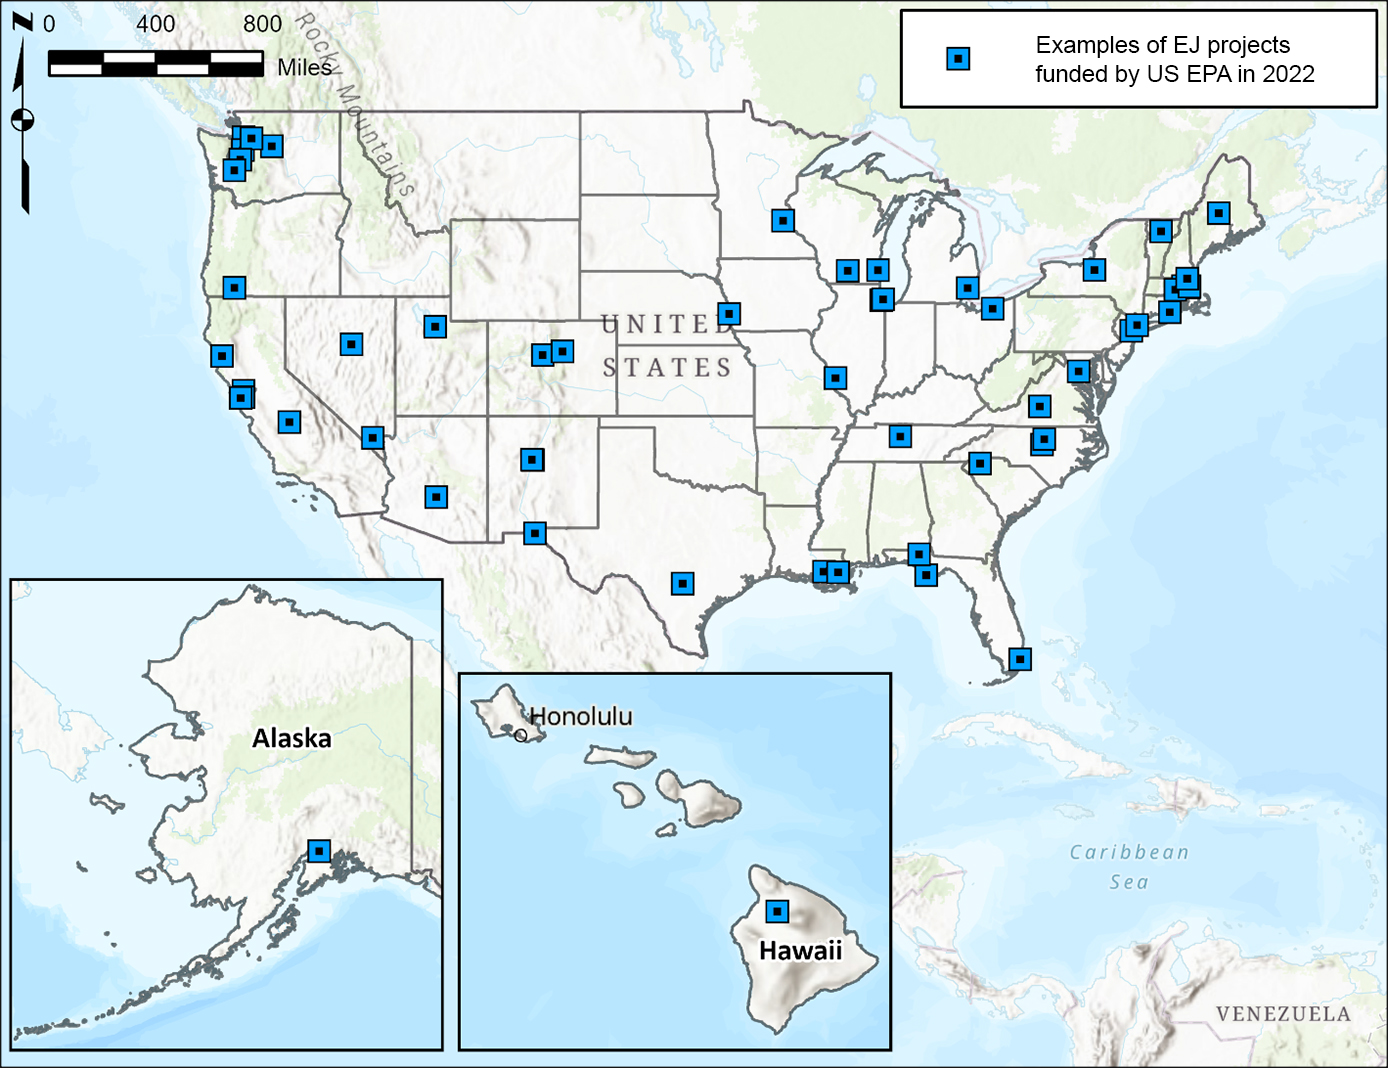 Map of US with blue squares indicating sites of EJ projects funded by US EPA in 2022